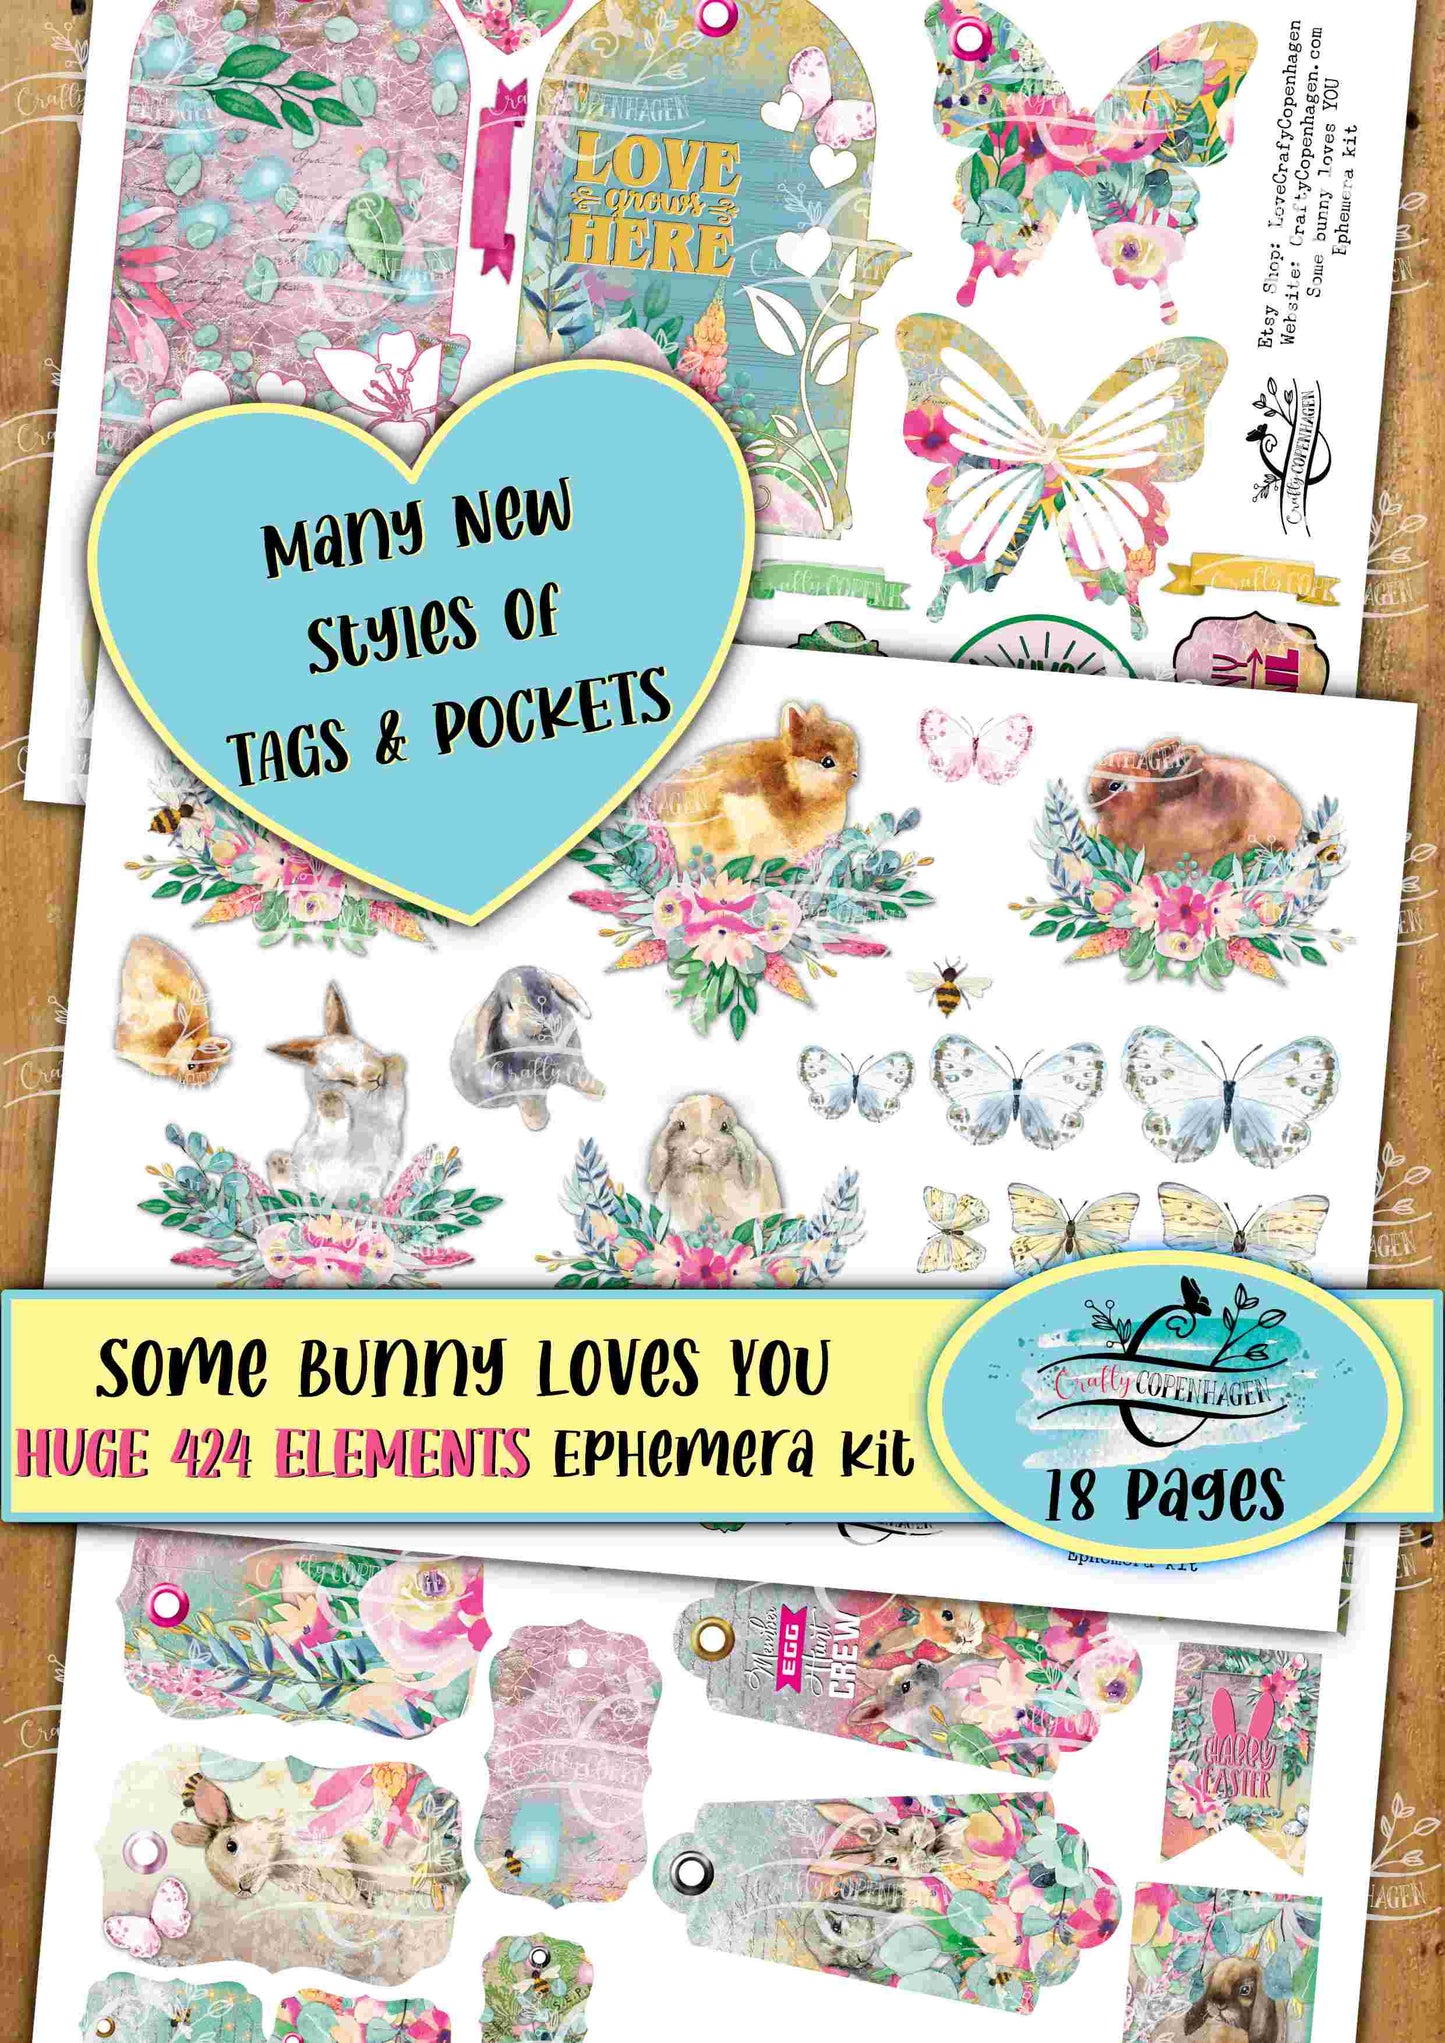 Some Bunny Loves YOU Ephemera Kit - HUGE 424 Elements on 18 Pages for Instant Download & Print, Spring, Easter, Yellow, Green, Floral